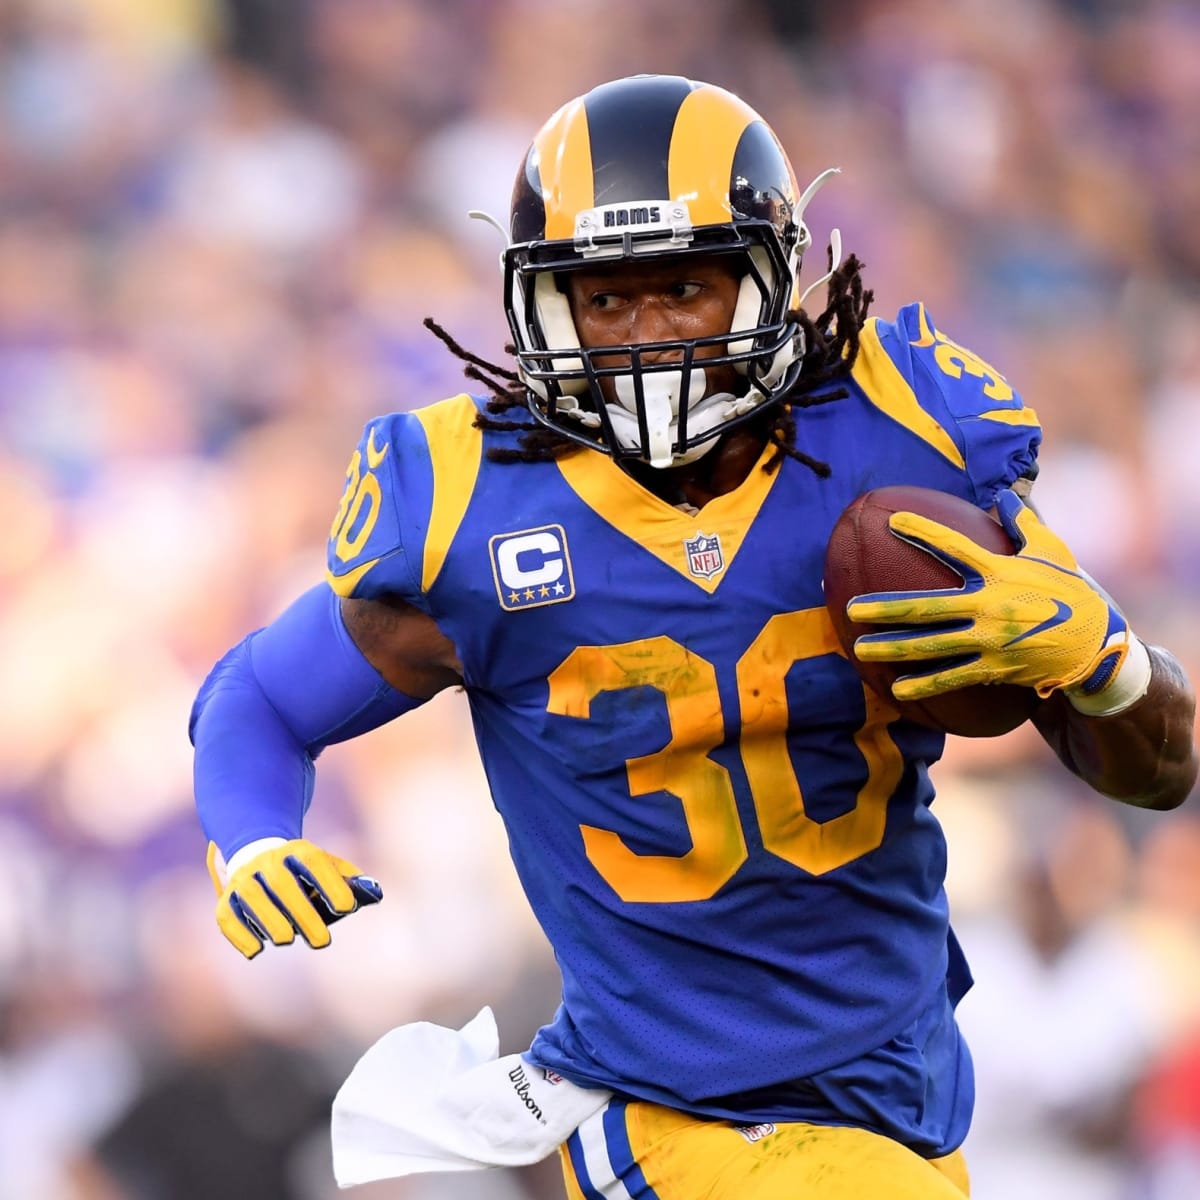 Todd Gurley in best place to lead 2017 NFL season in rushing